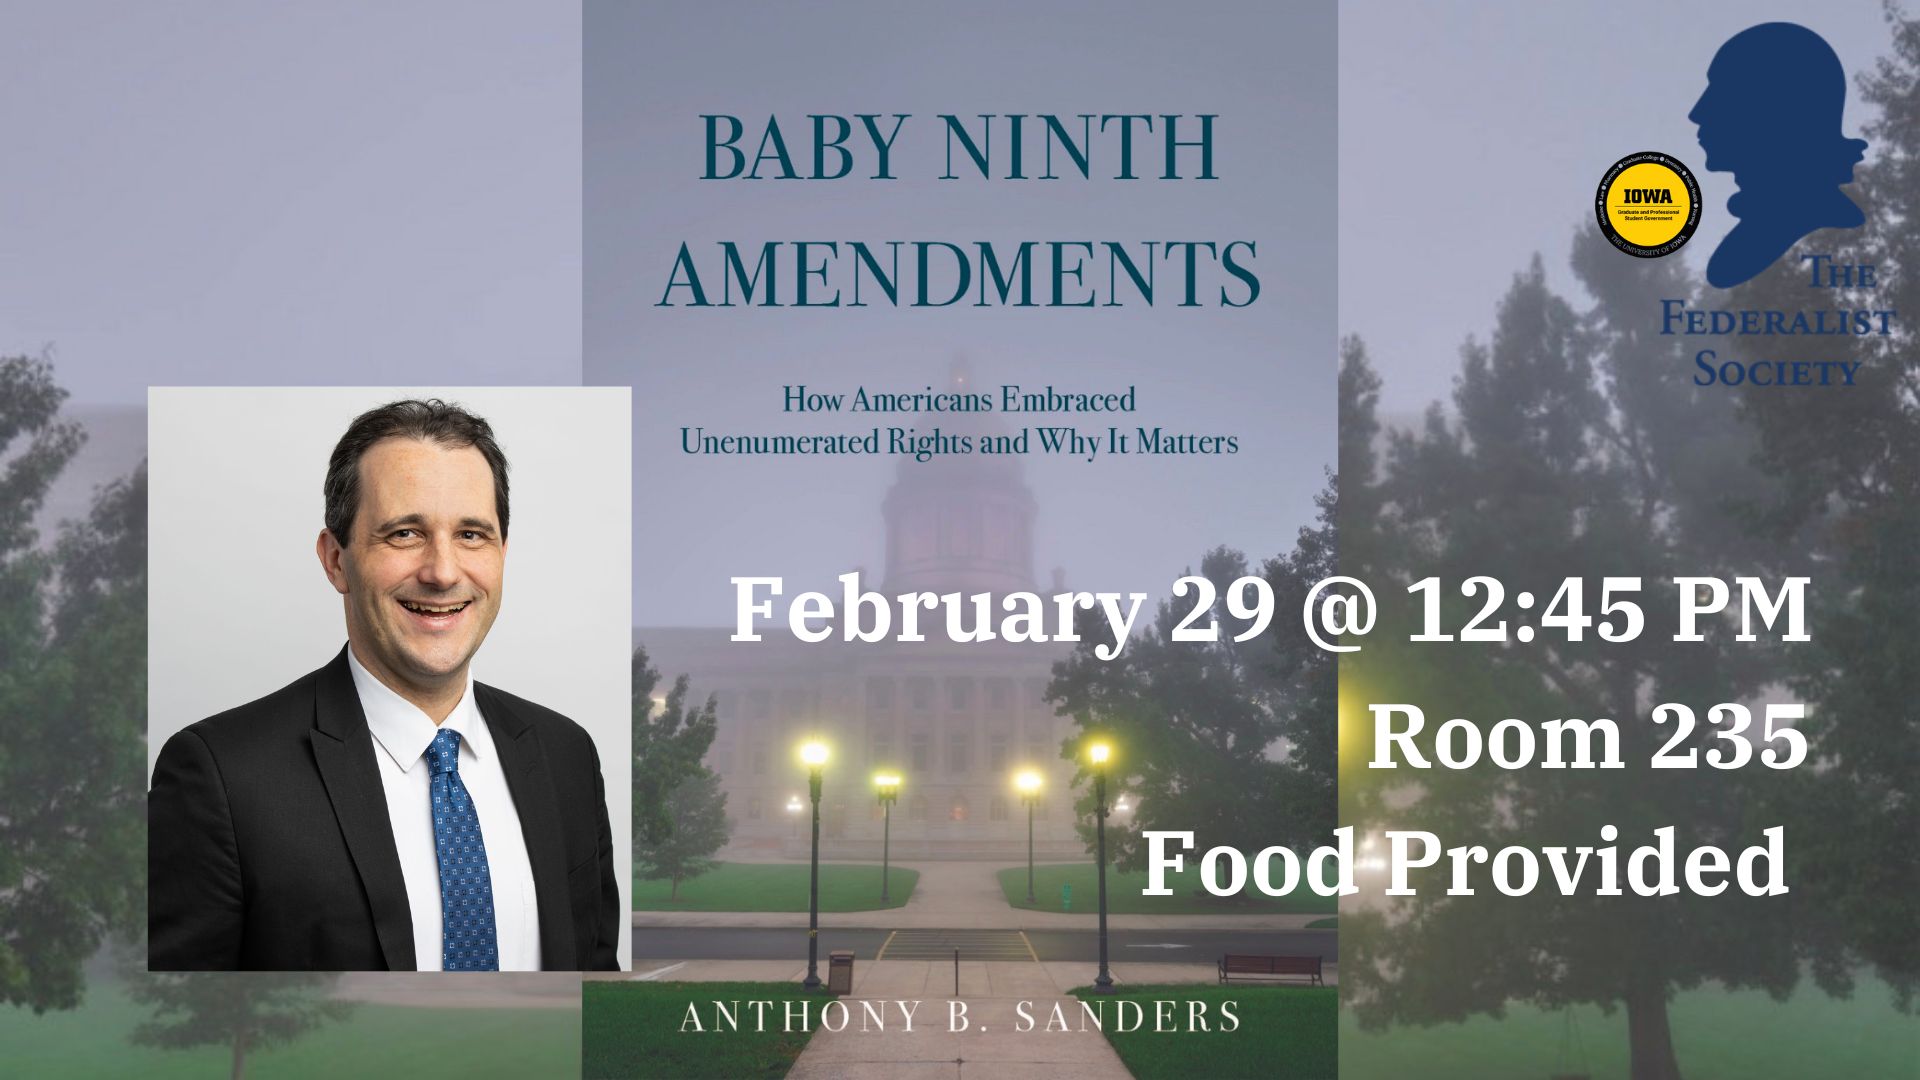 Federalist Society will be hosting Anthony Sanders as he talks about Baby Ninth Amendments. He will be speaking February 29th at 12:45pm in room 235. Food will be provided!